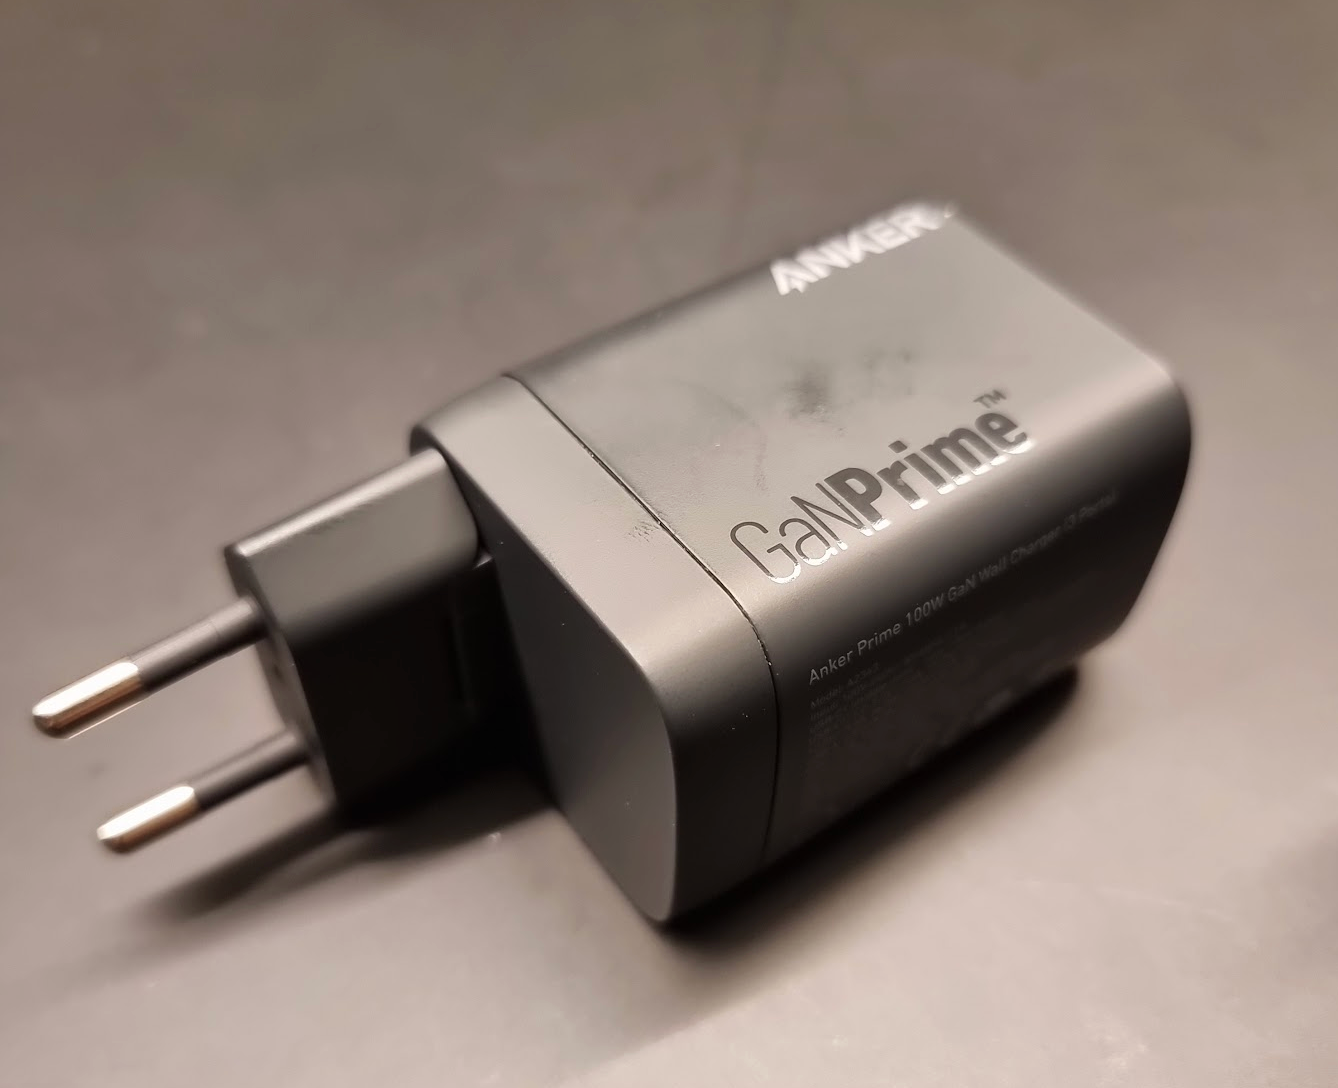 Upgrading my travel kit with the Anker Prime 100W GaN charger